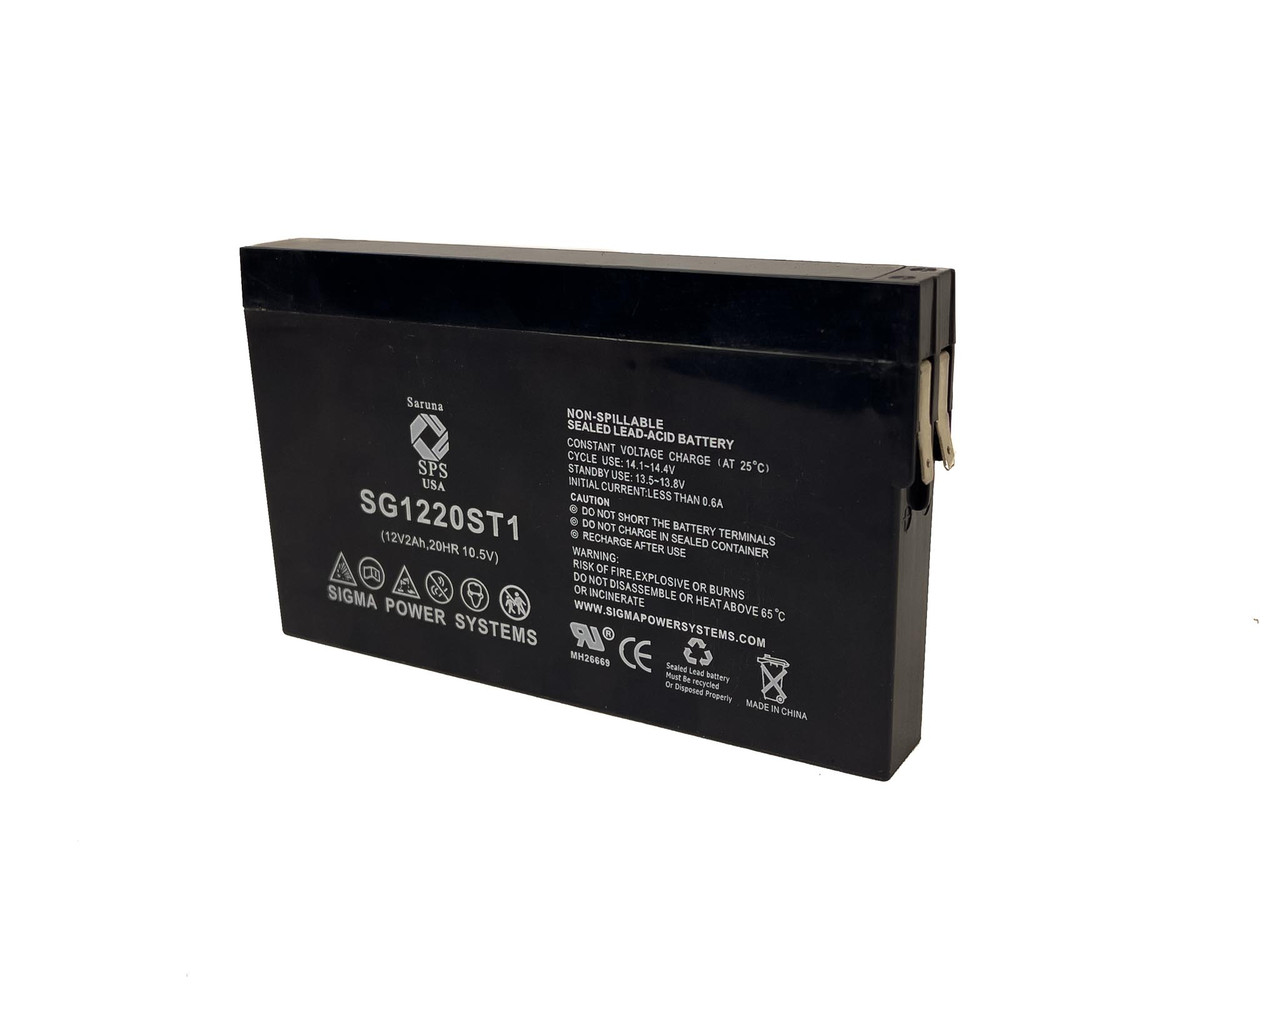 Raion Power 12V 2Ah Non-Spillable Replacement Rechargebale Battery for Litton ST511 Stats Scope